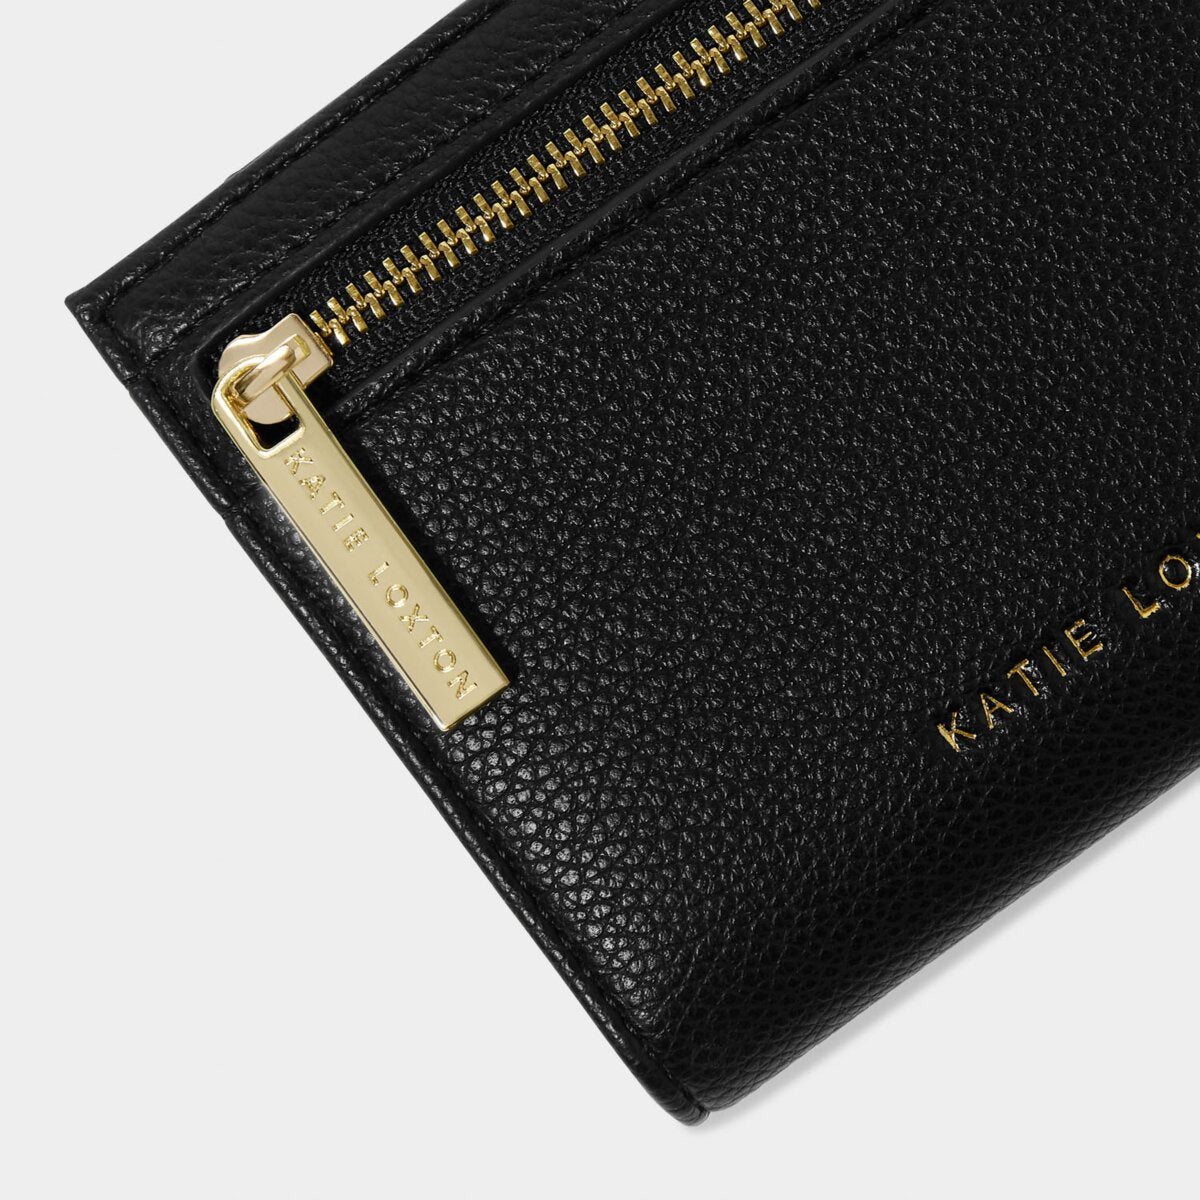 close up of black purse highlighting gold zipper which says Katie Loxton